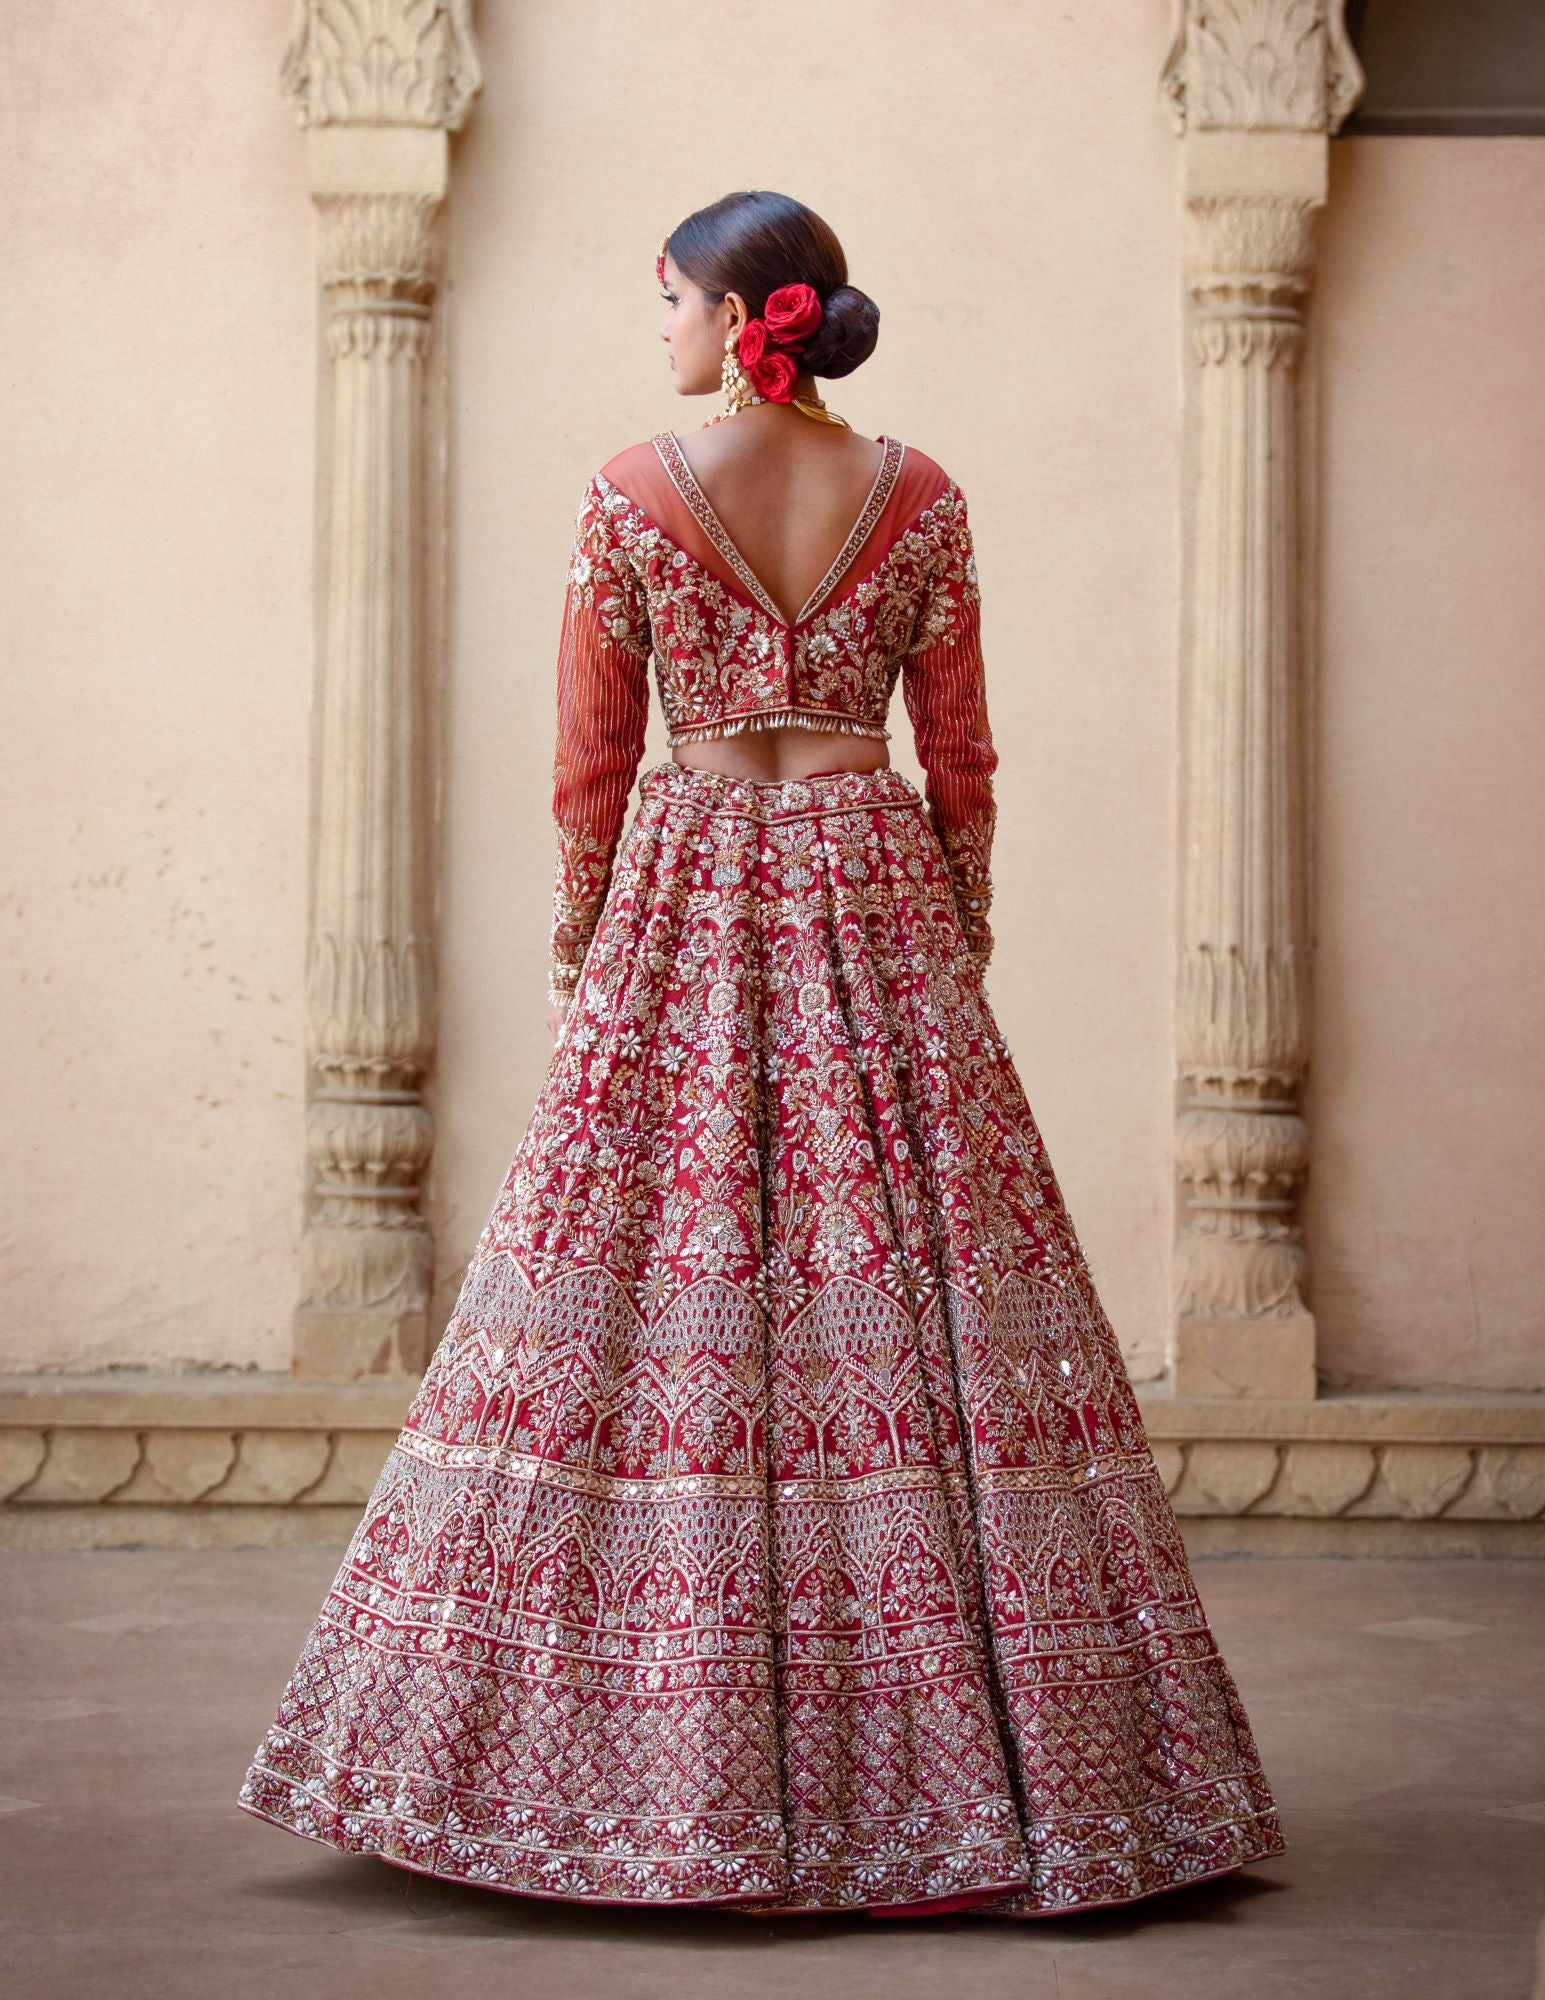 10 Stunning Red Bridal Lehengas To Have Perfect Look at Your Wedding! |  Indian wedding dress bridal lehenga, Indian bridal dress, Indian bridal wear